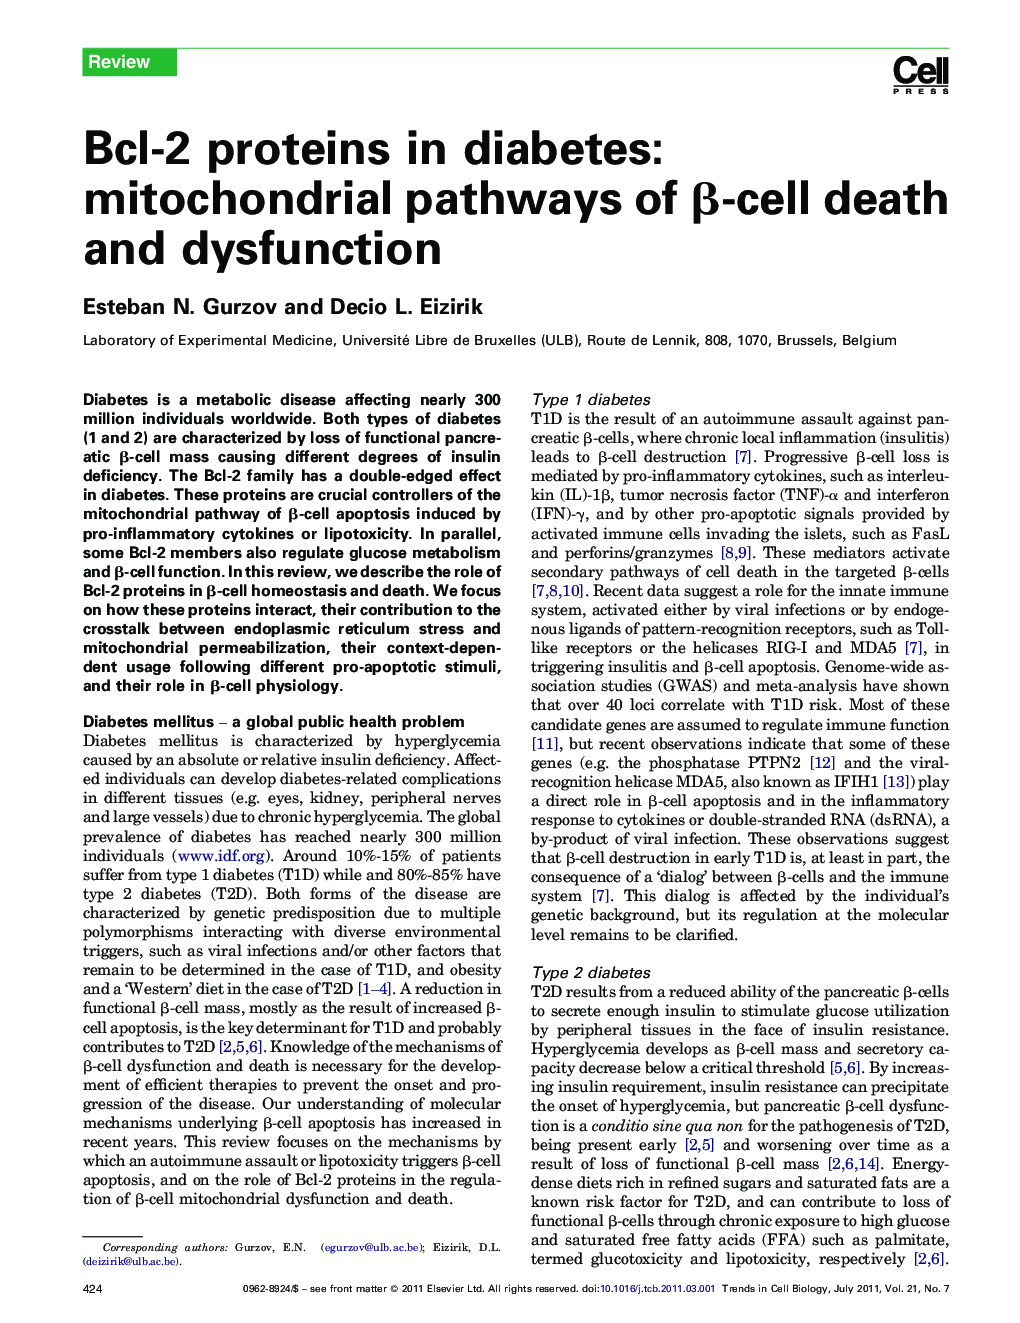 Bcl-2 proteins in diabetes: mitochondrial pathways of β-cell death and dysfunction